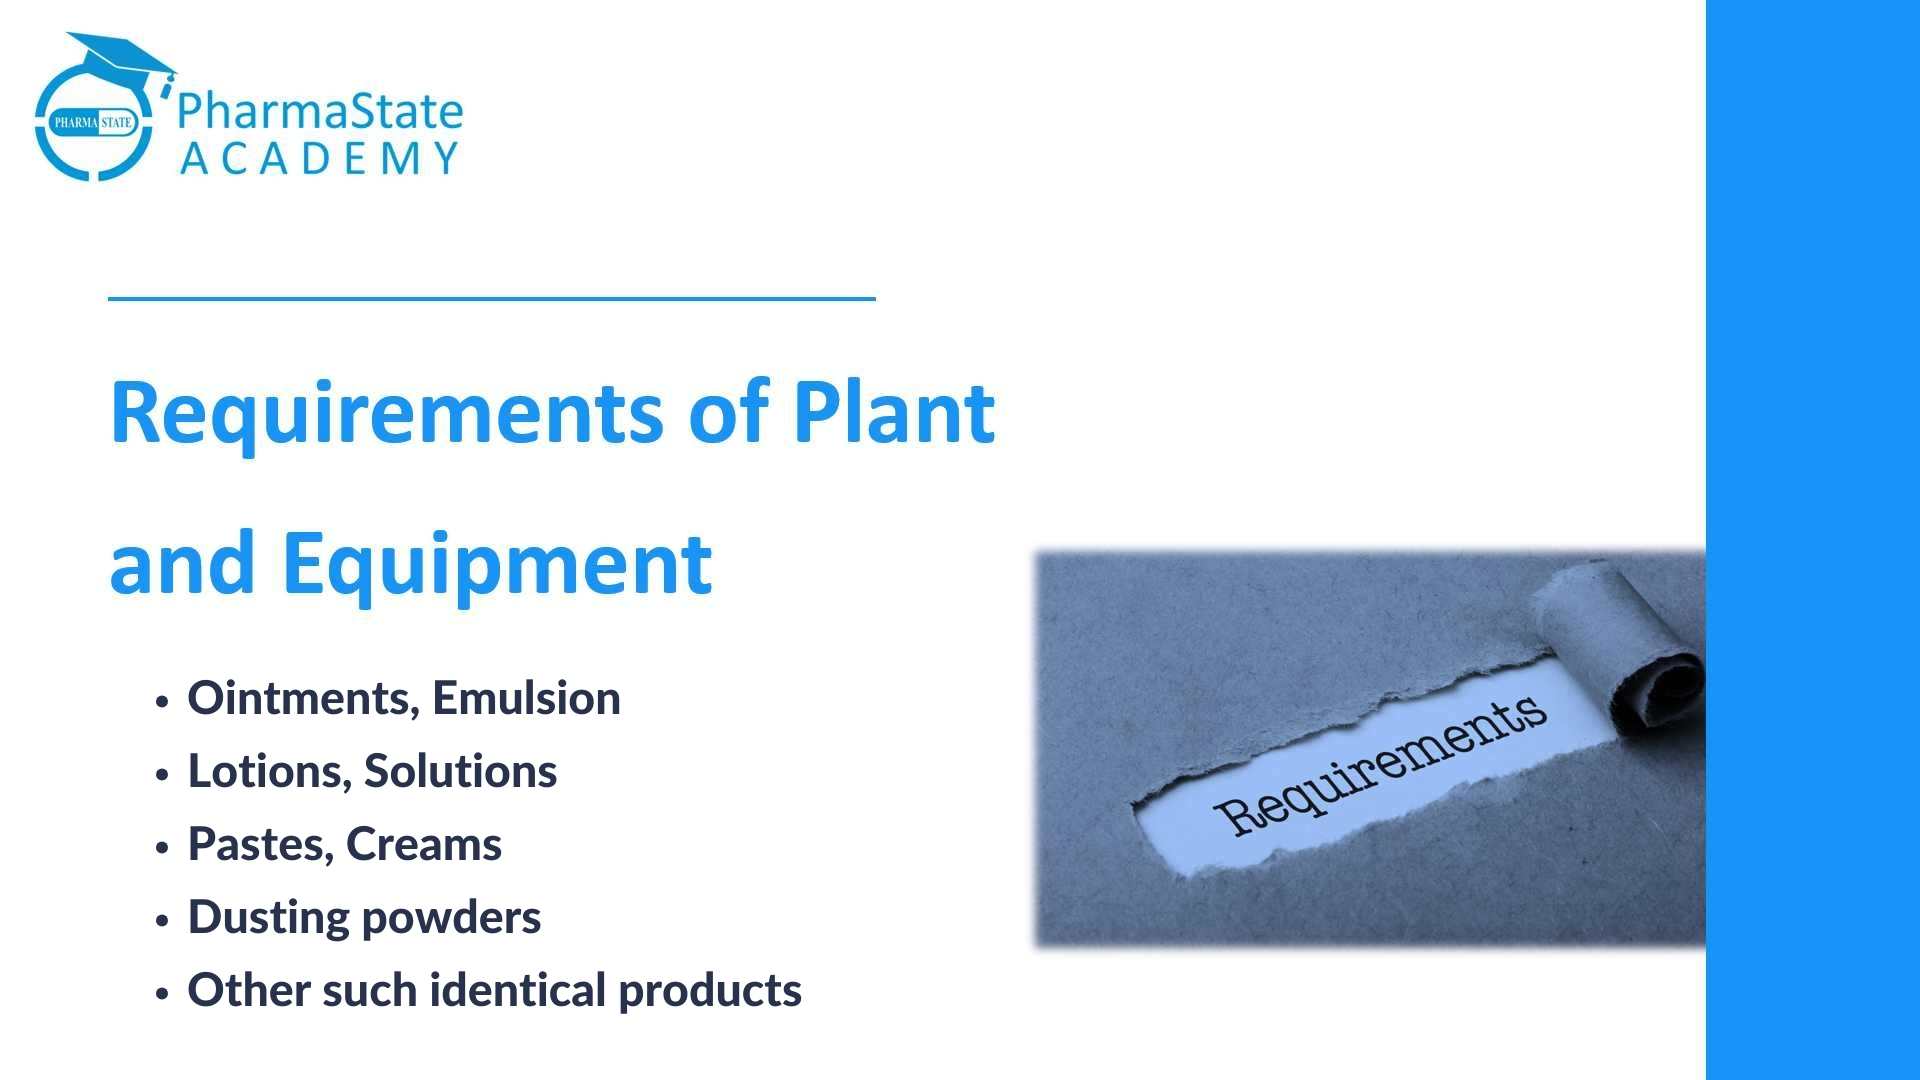 Requirements of Plant and Equipment for Ointments, Emulsion, Lotions, Solutions, Pastes, Creams, Dusting powders